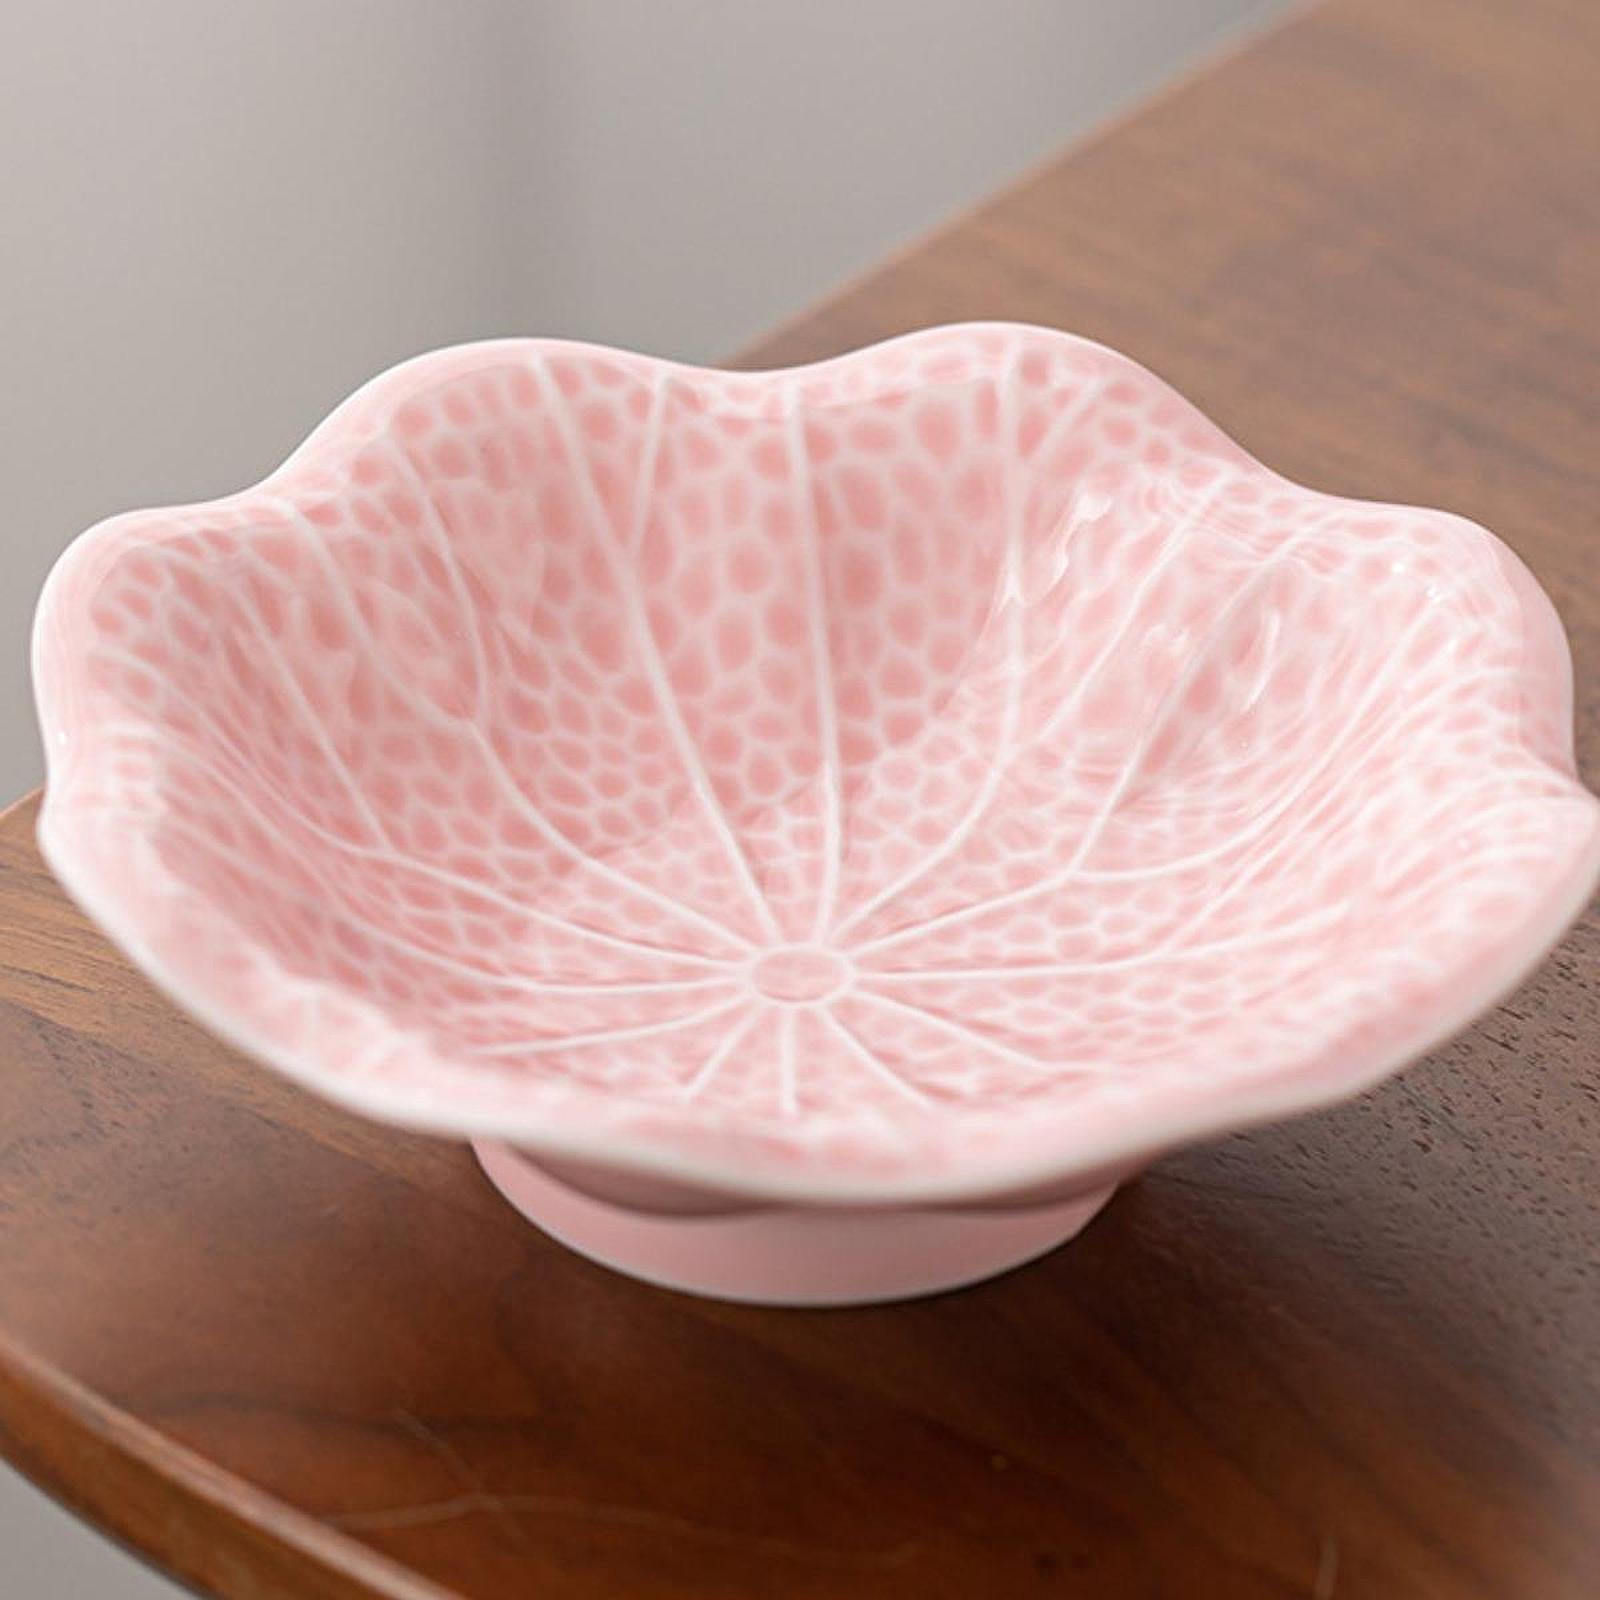 Ceramic Fruit Bowl Table Decor Ceramic Dessert Plate for Sweets Nuts Cookies Pink